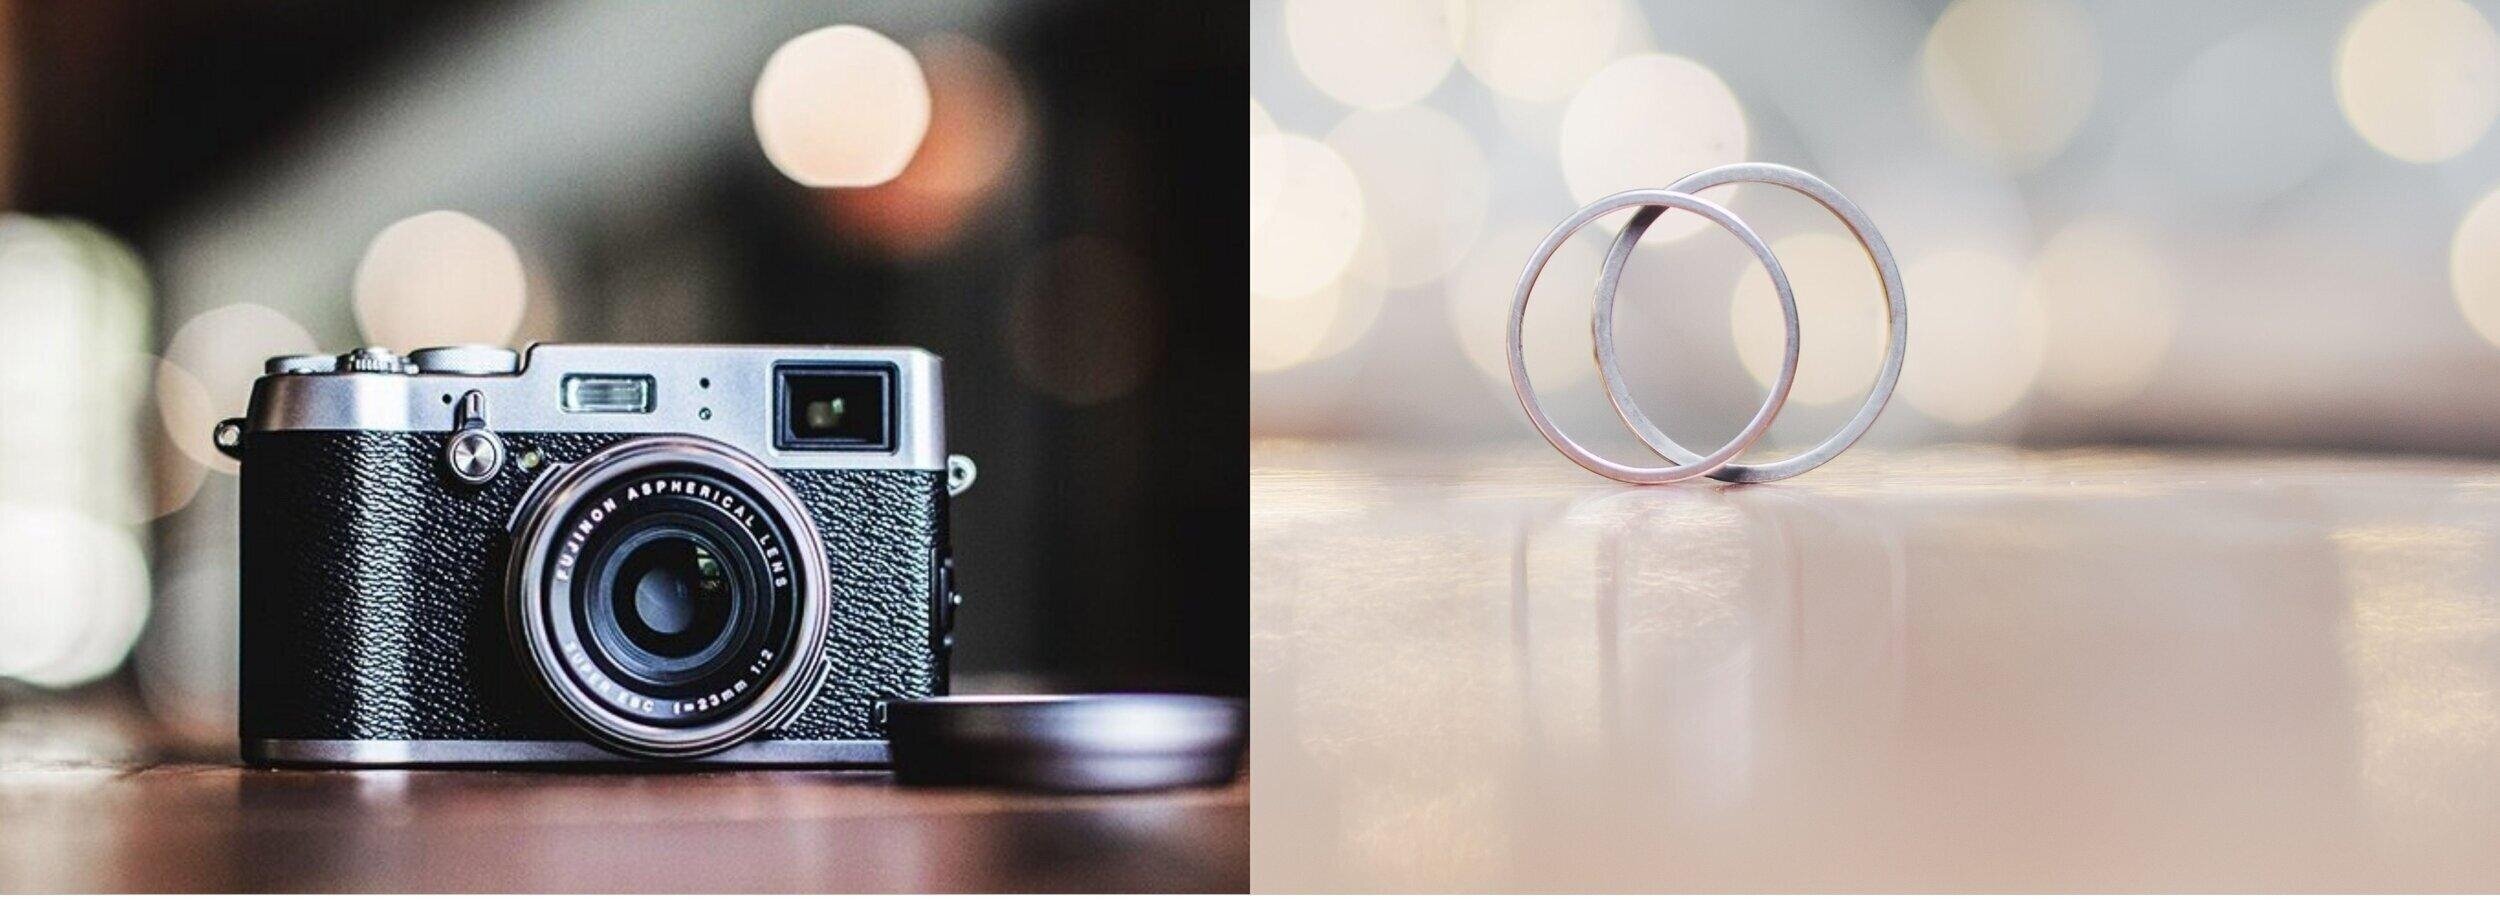 tips before hiring a wedding photographer in Chicago